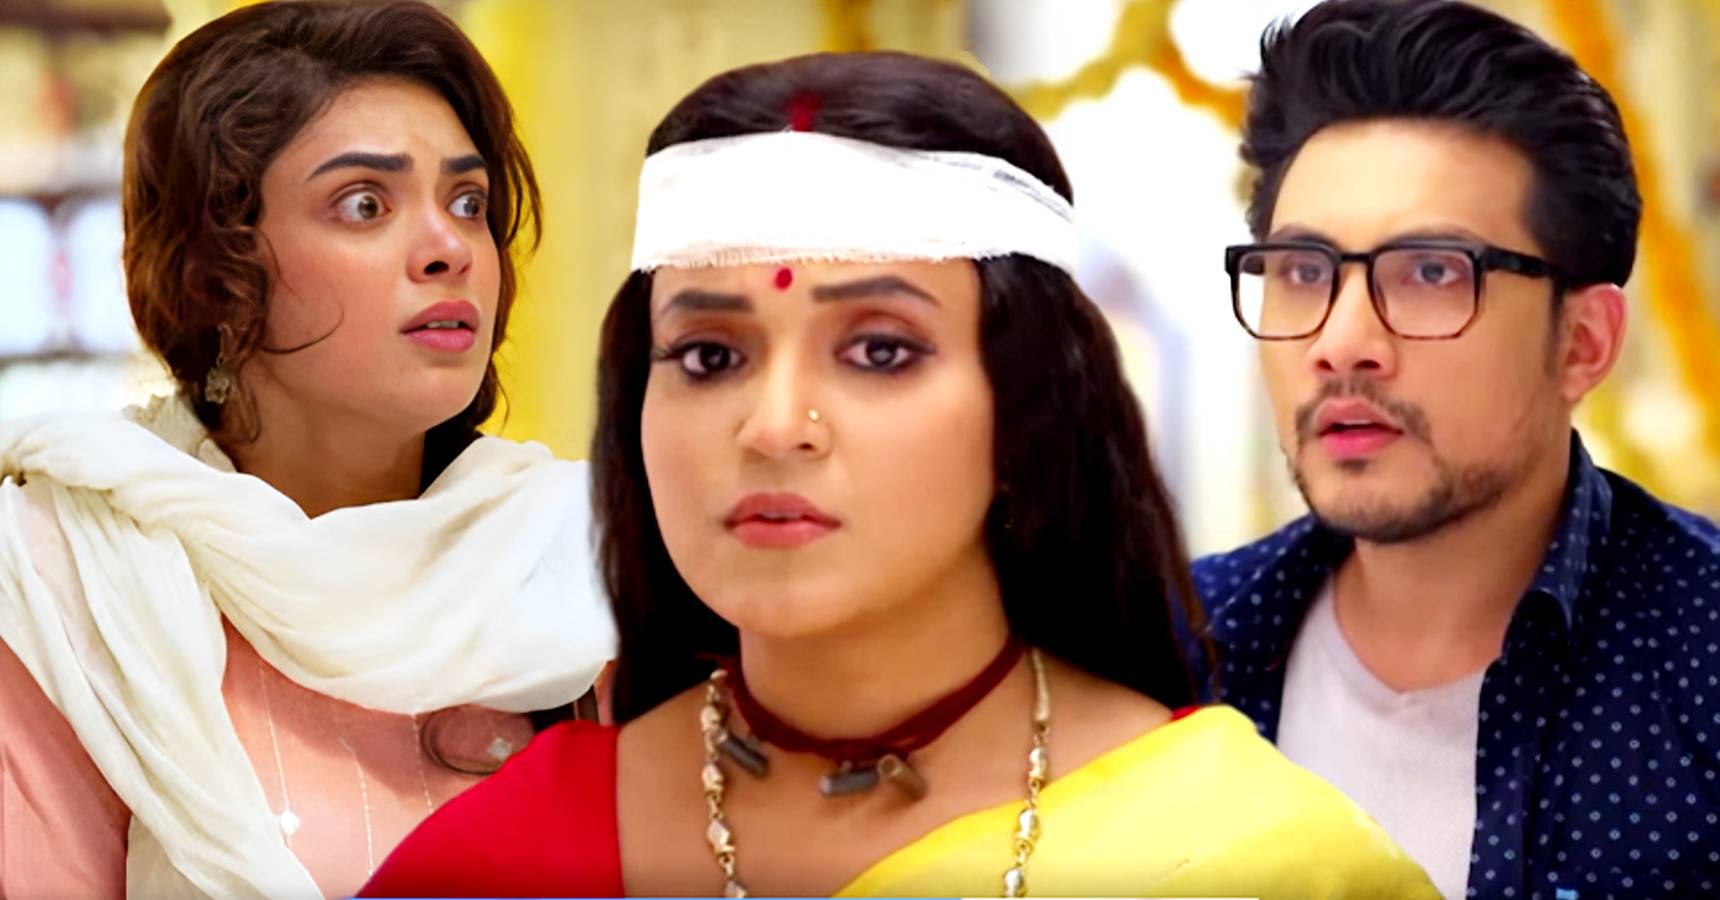 Star Jalsha Bengali serial Sandhyatara special two episode promo is out now